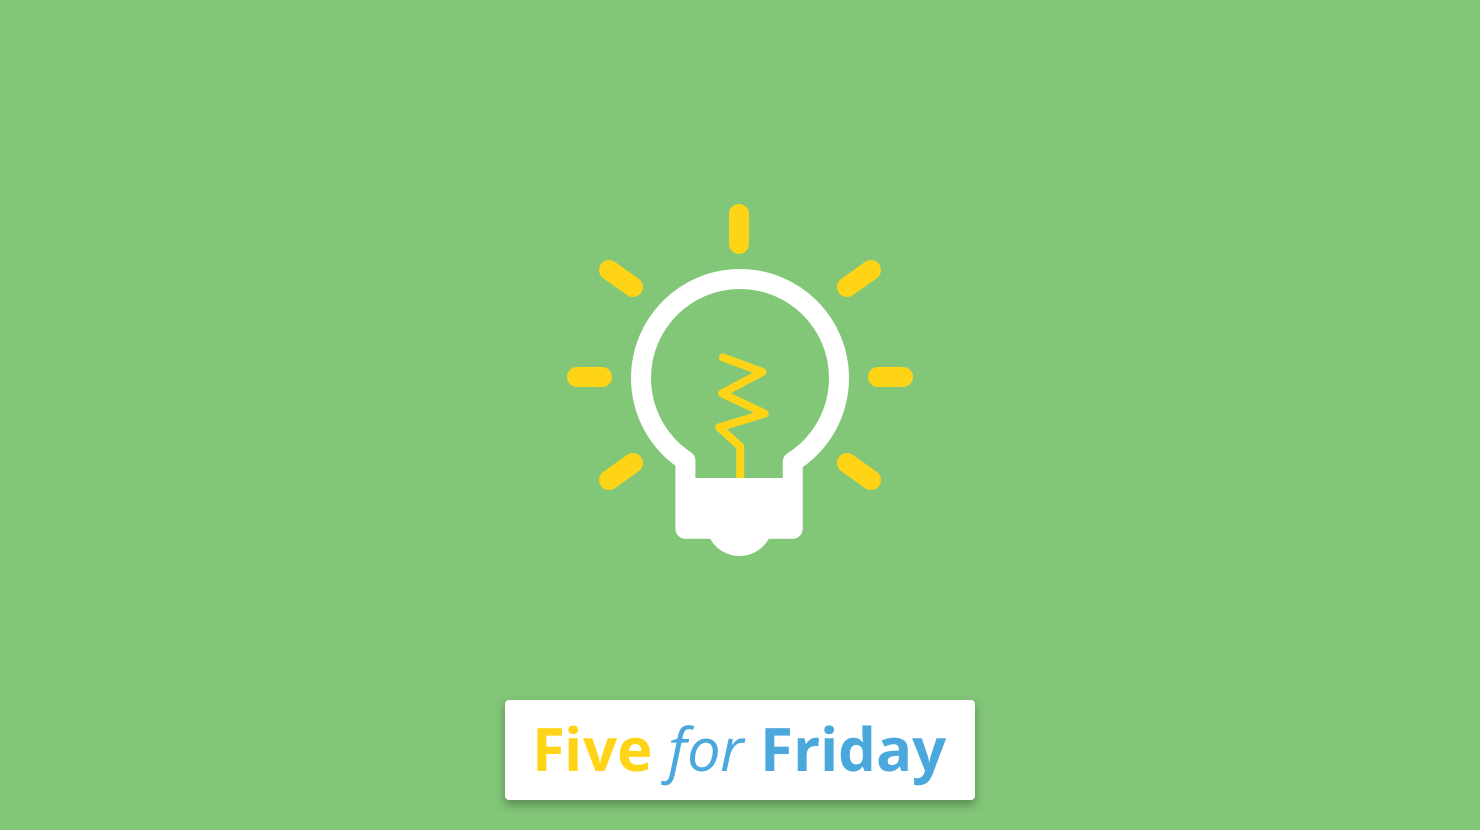 Five for Friday: Workplace inspiration